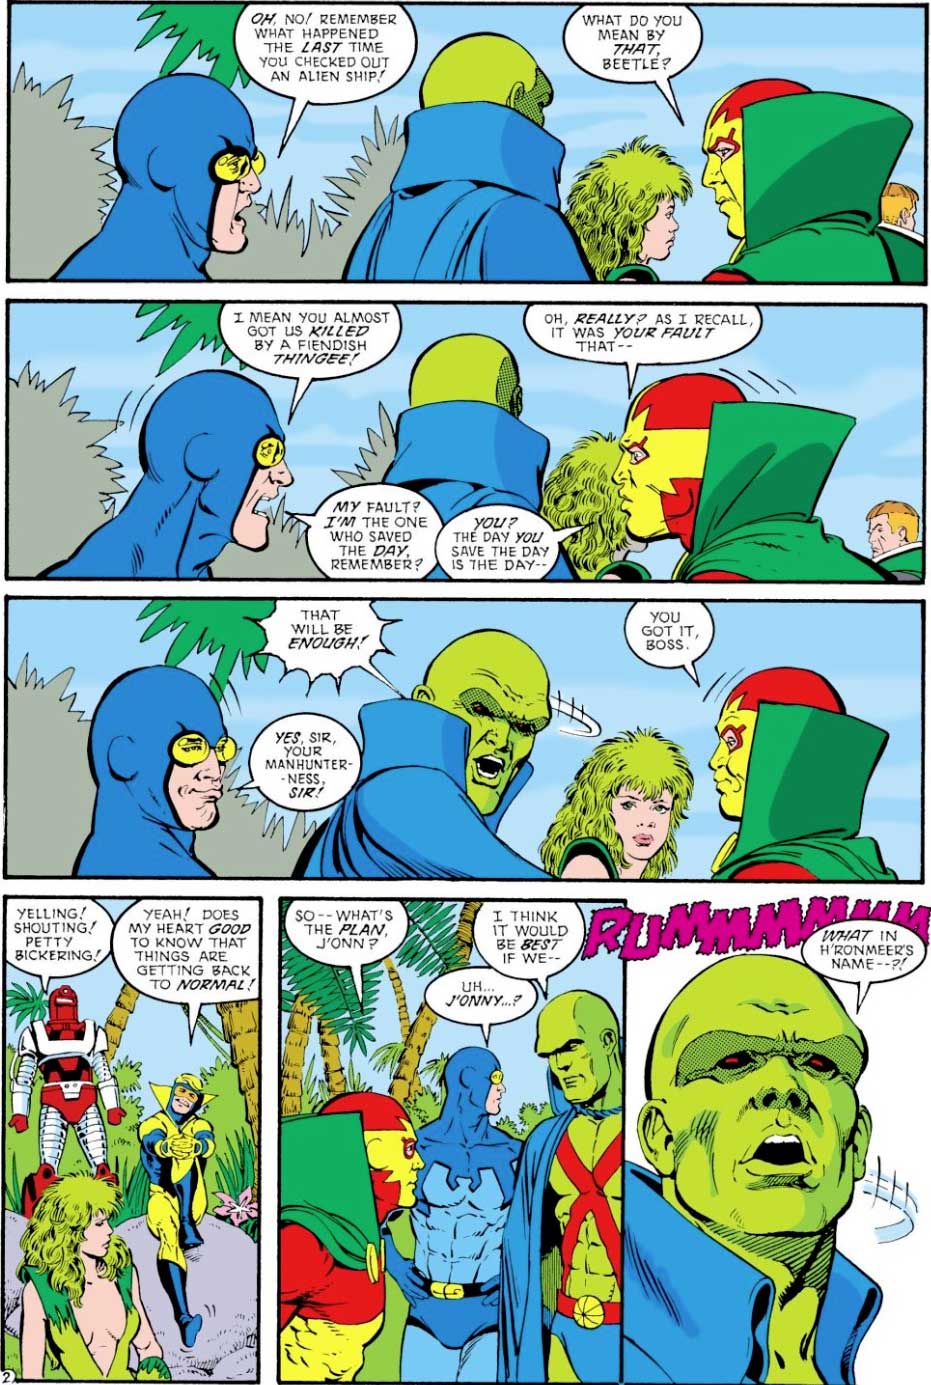 Justice League International #23 by Keith Giffen, JM DeMatteis, Kevin Maguire and Joe Rubinstein